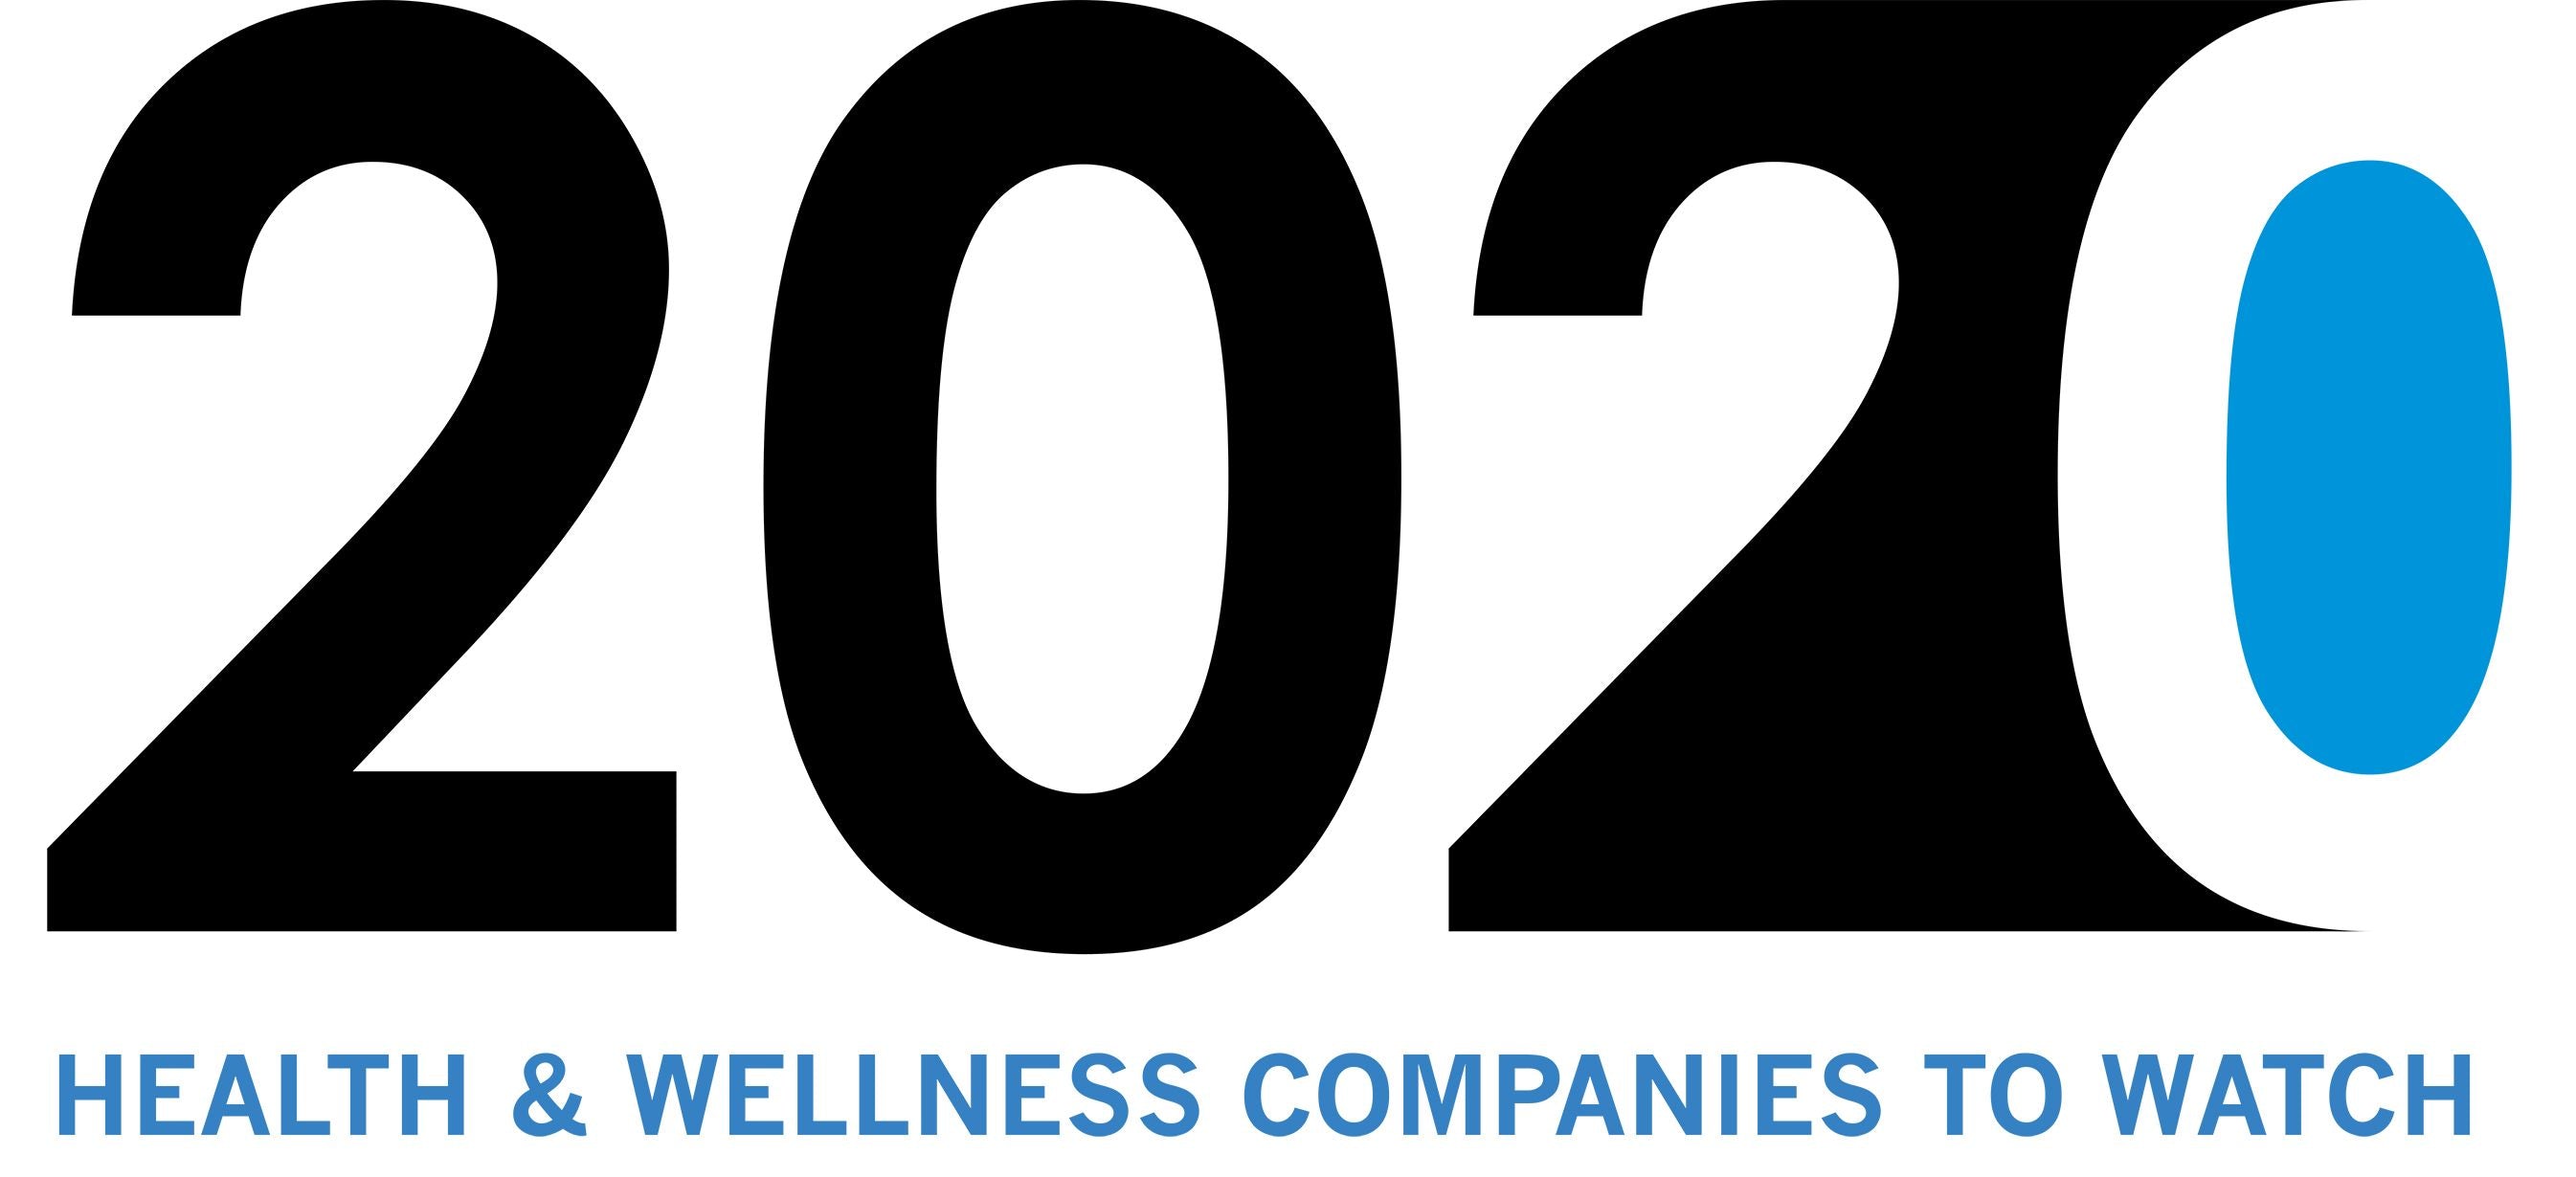 Press Release: MFI Medical Equipment Inc. Receives The Startup Weekly’s 2020 Health & Wellness Companies to Watch Award